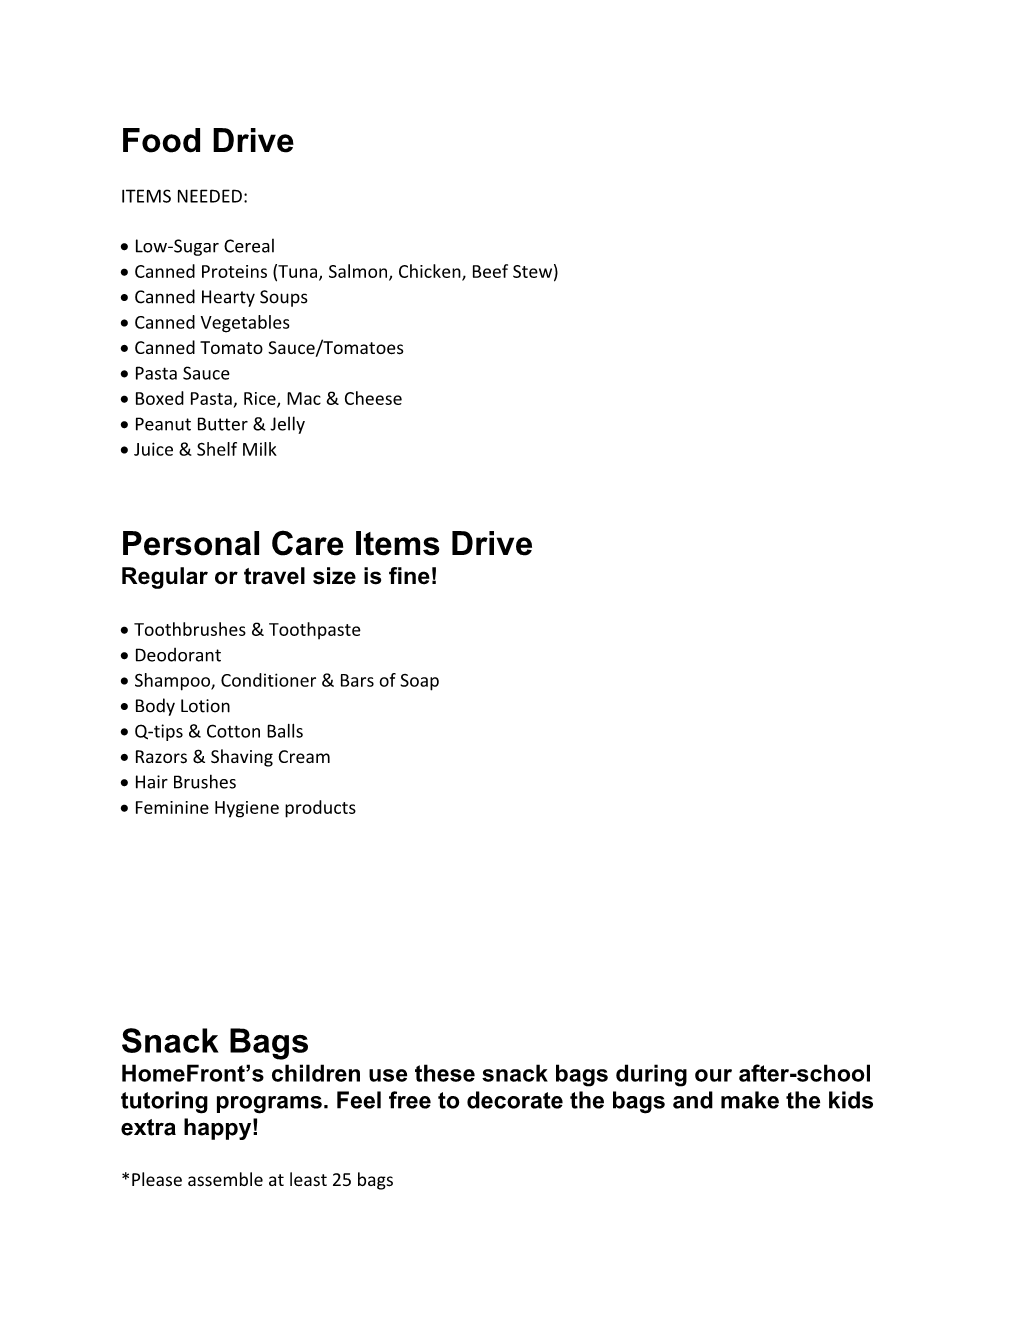 Here Are a Few Suggestions for Starting and Organizing a Drive